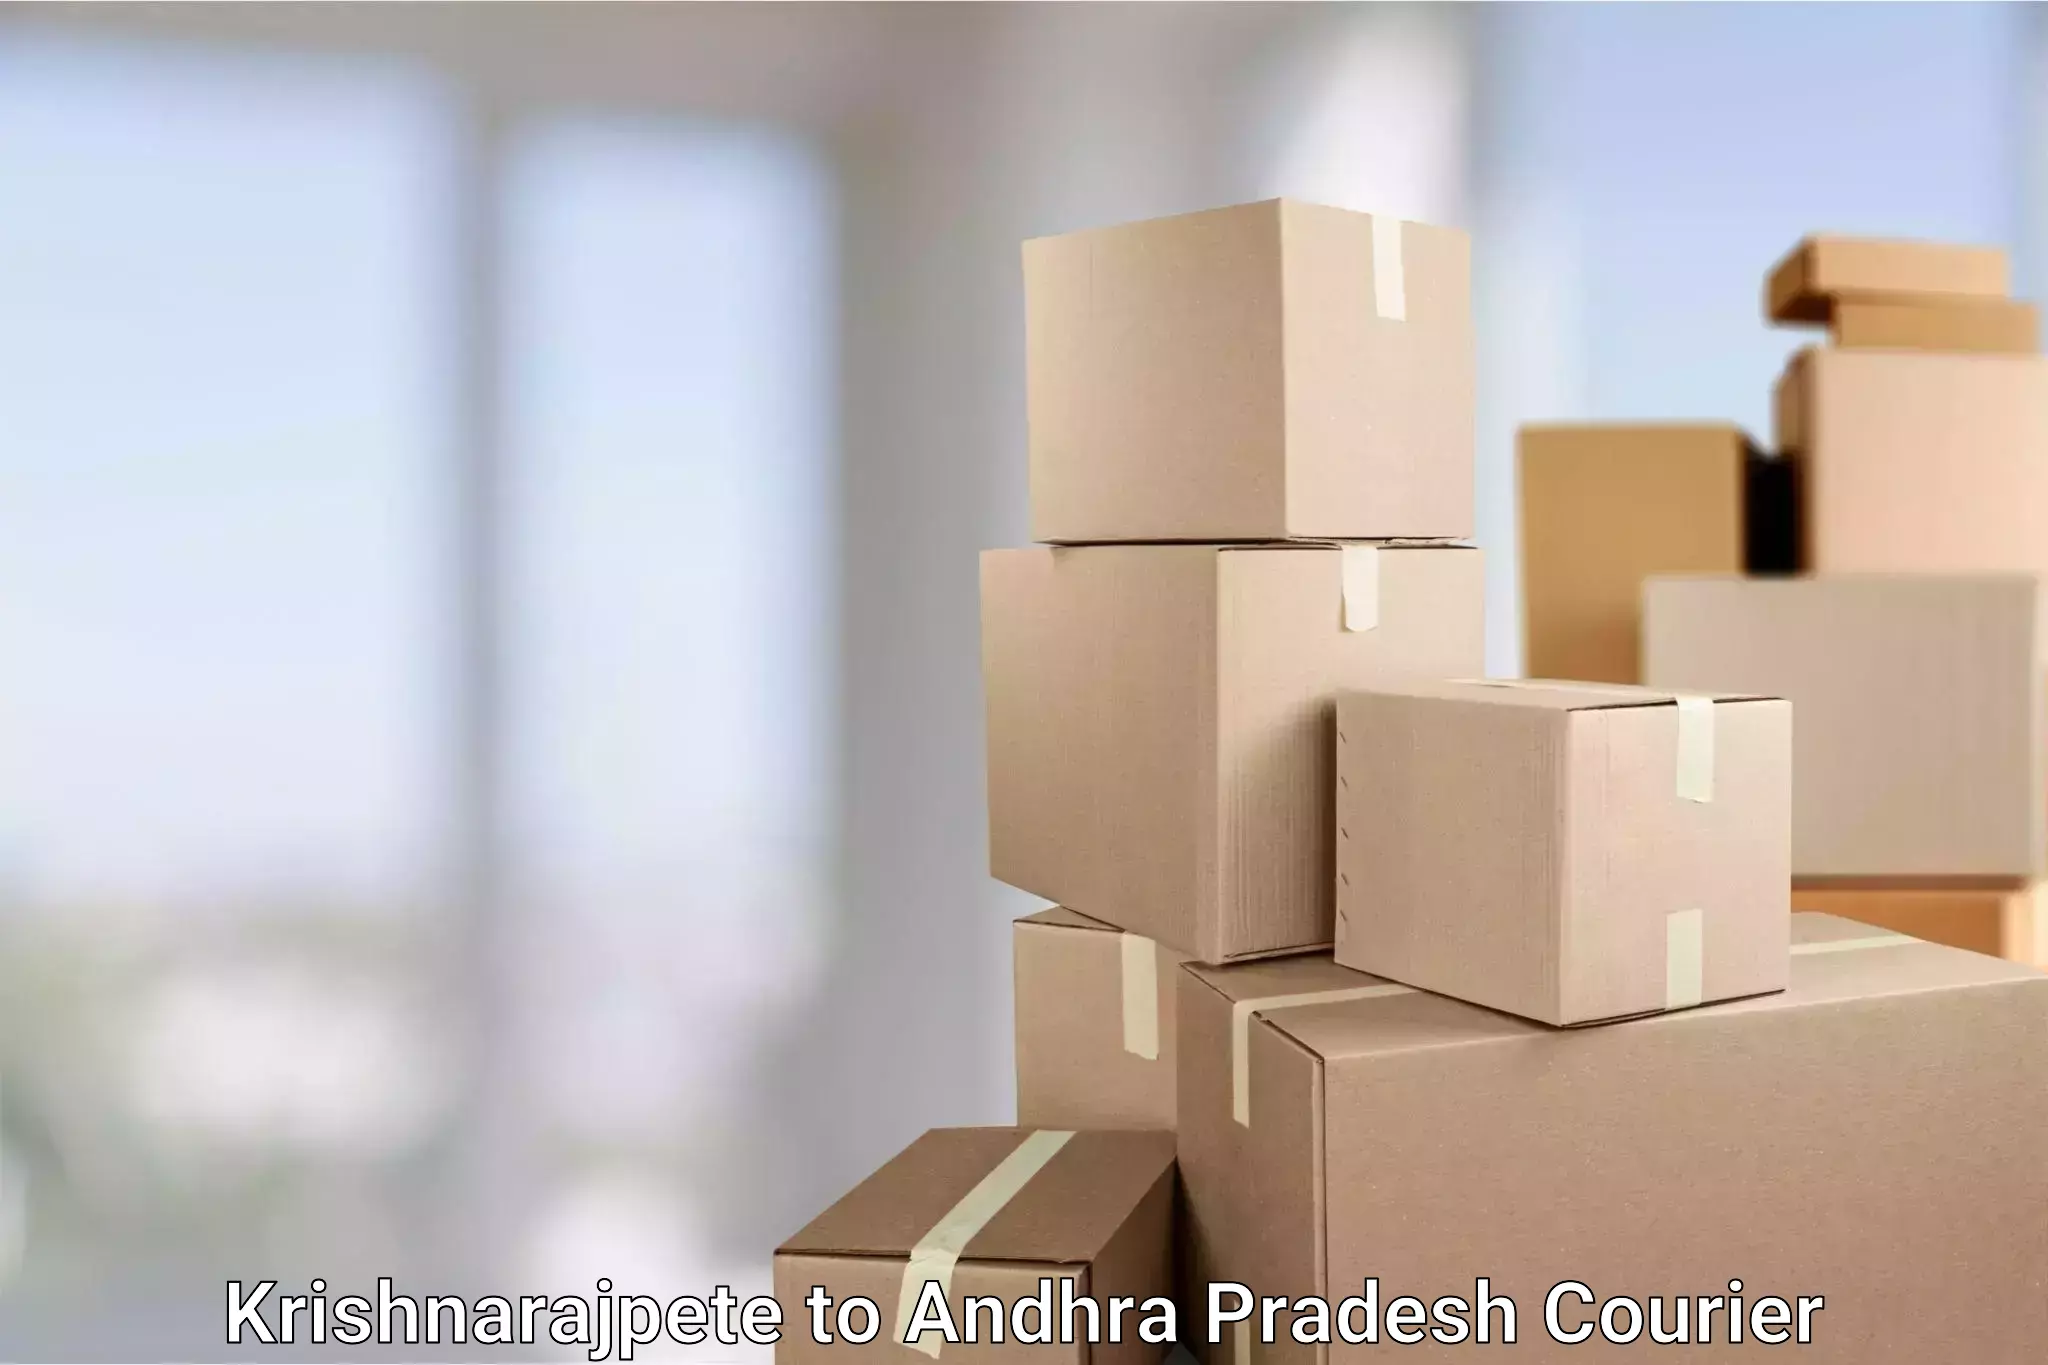 Overnight delivery services in Krishnarajpete to Andhra Pradesh